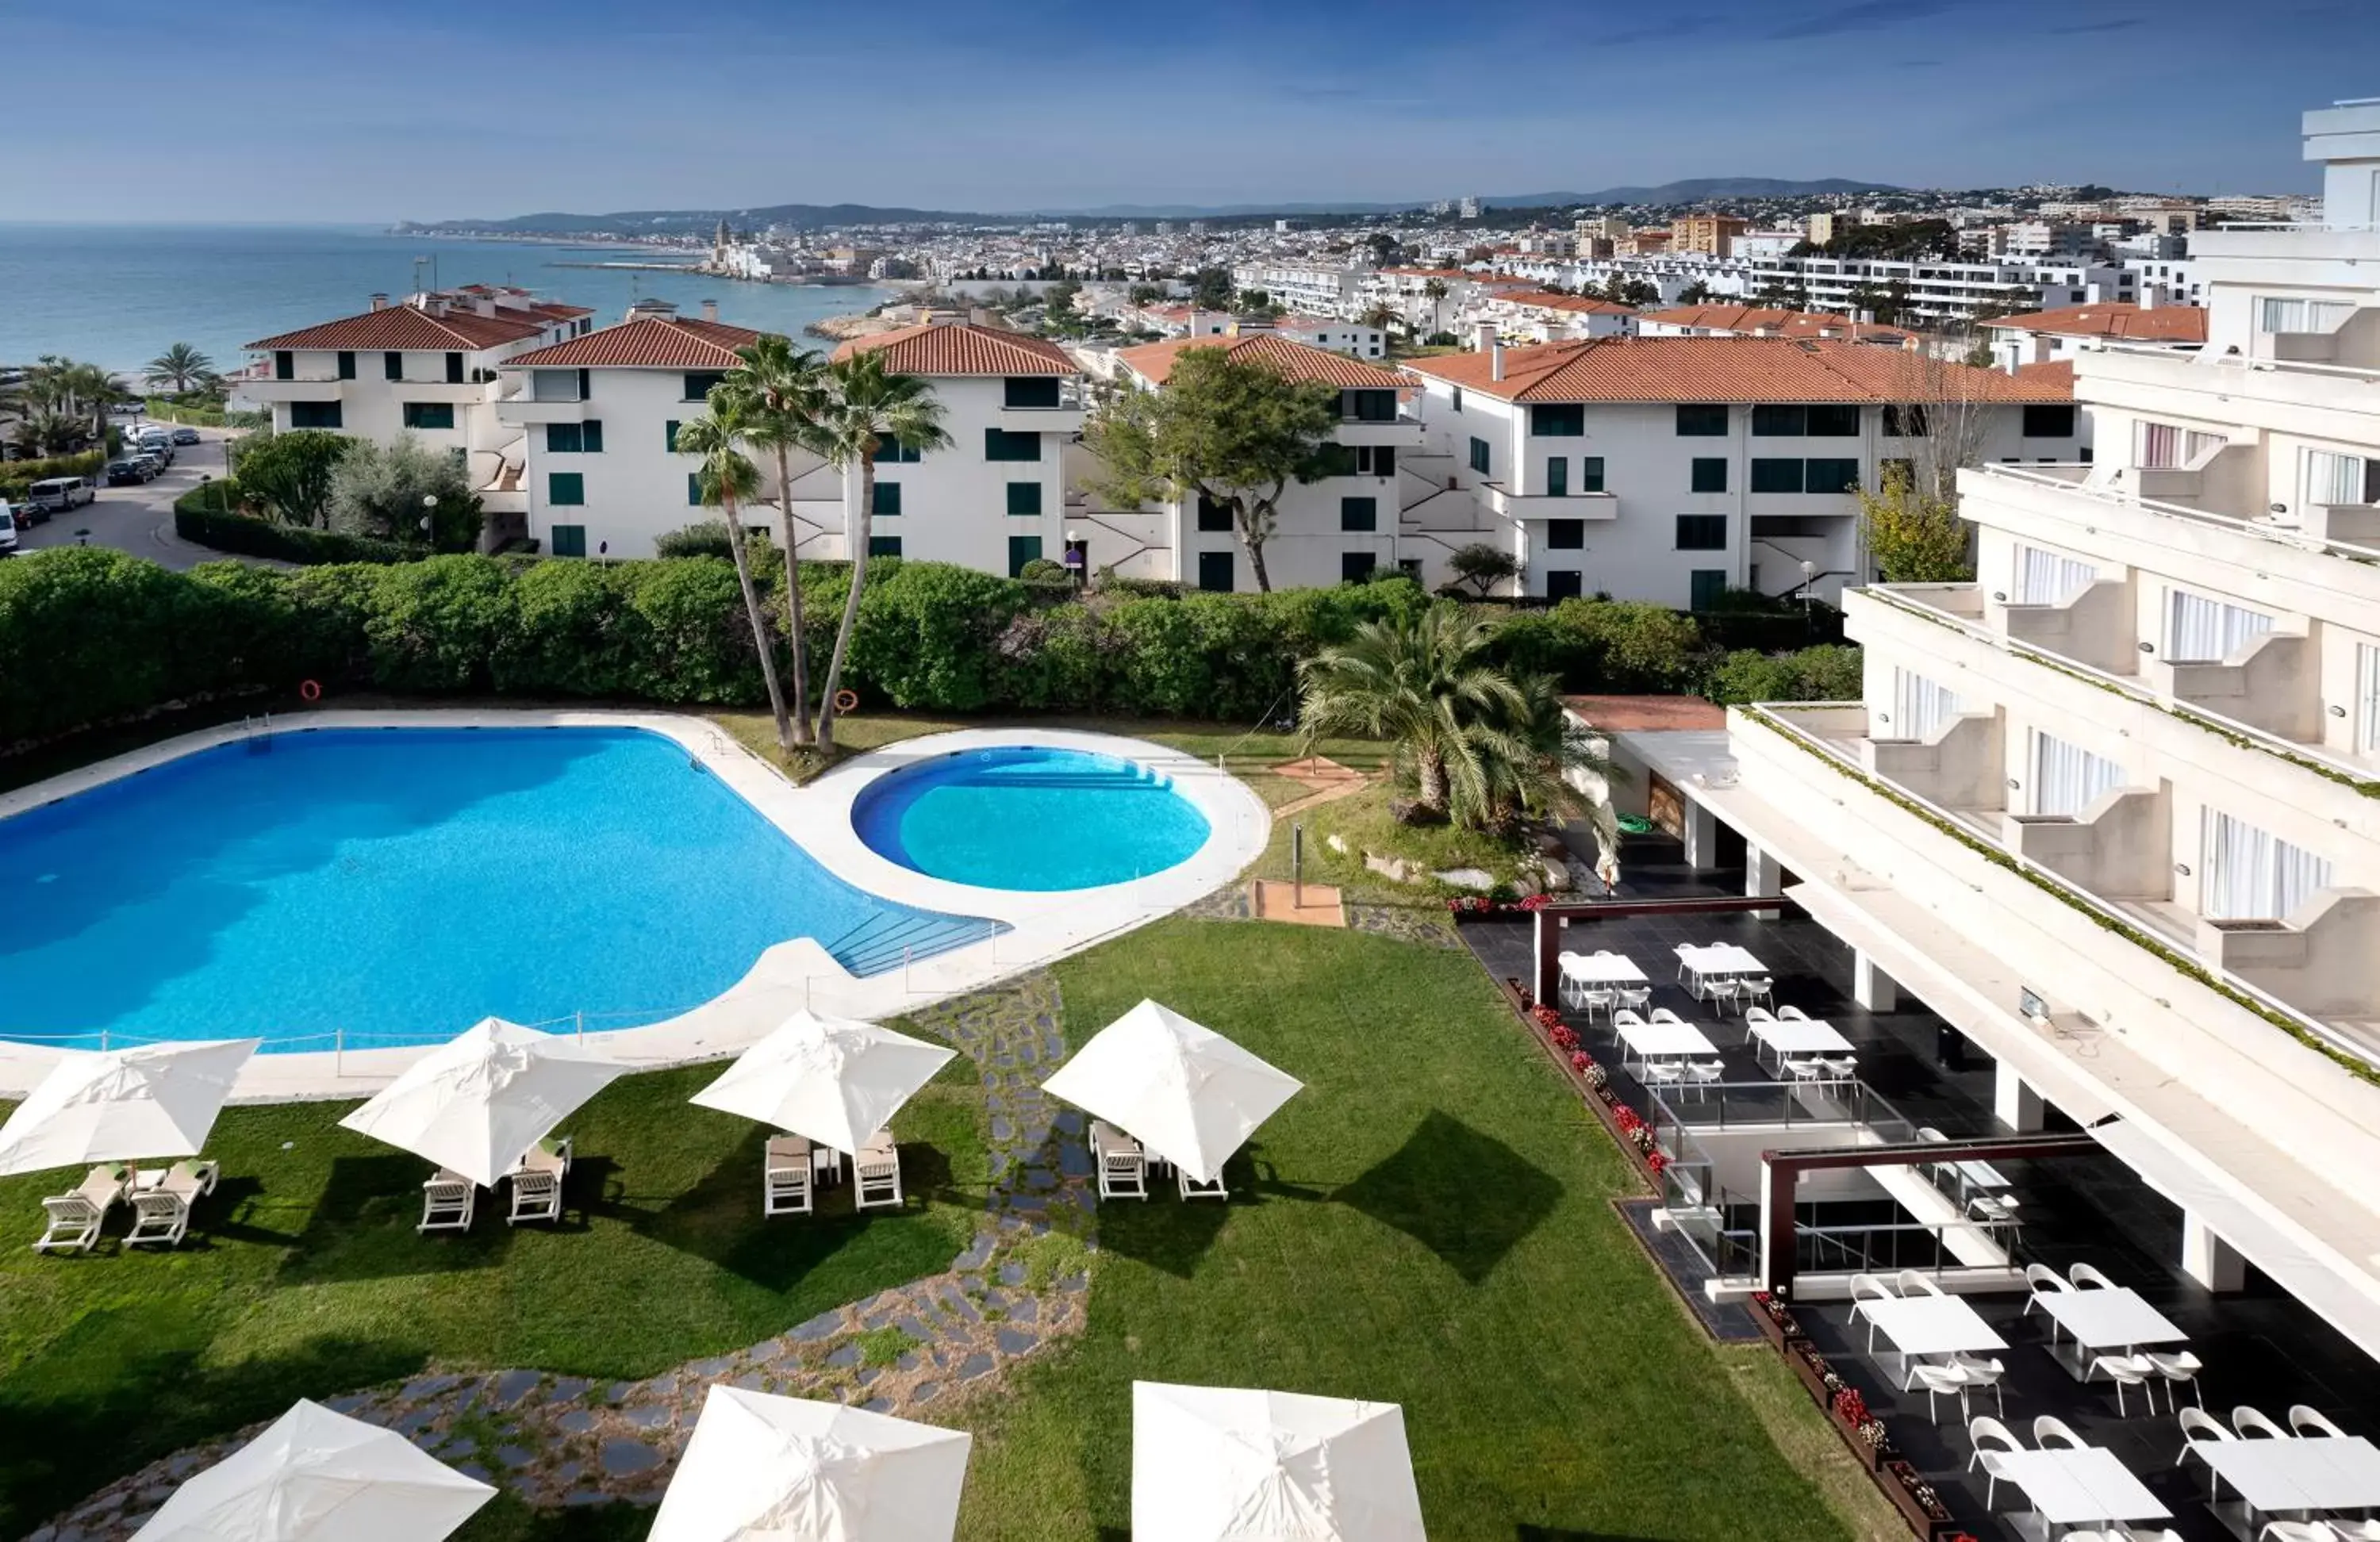 Garden, Pool View in Melia Sitges